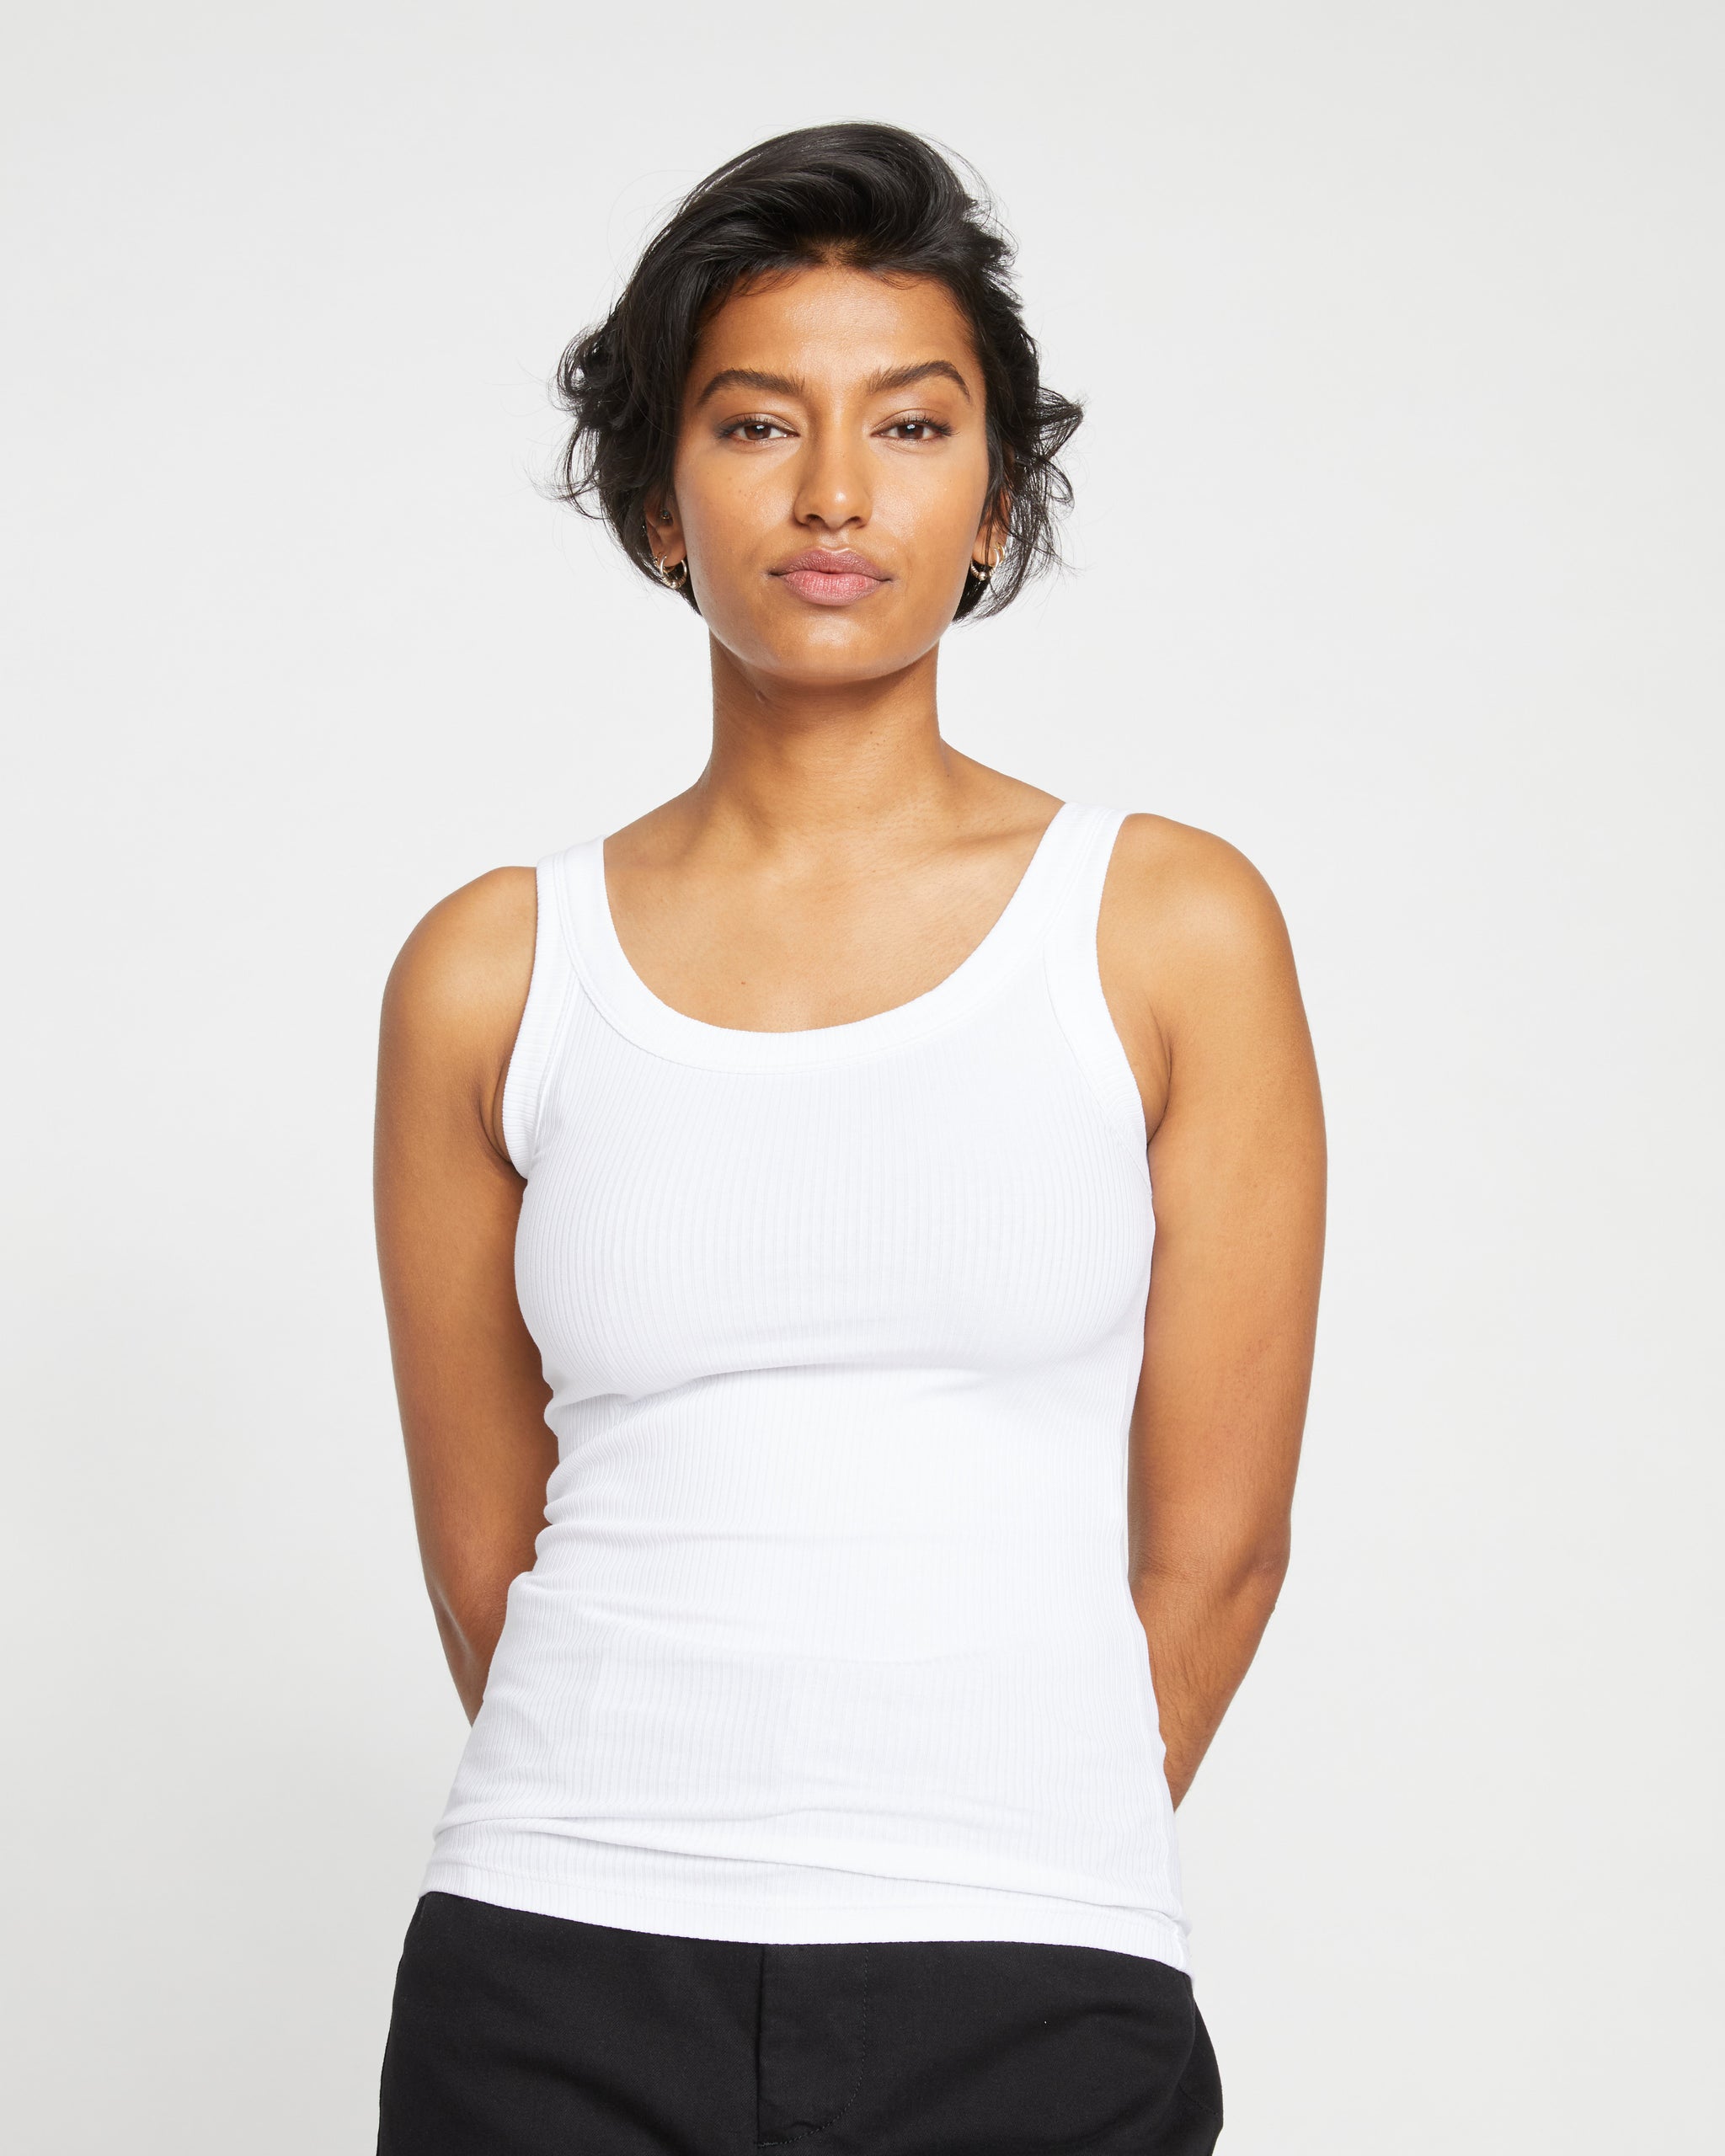 The Ribbed Tank Top for Women